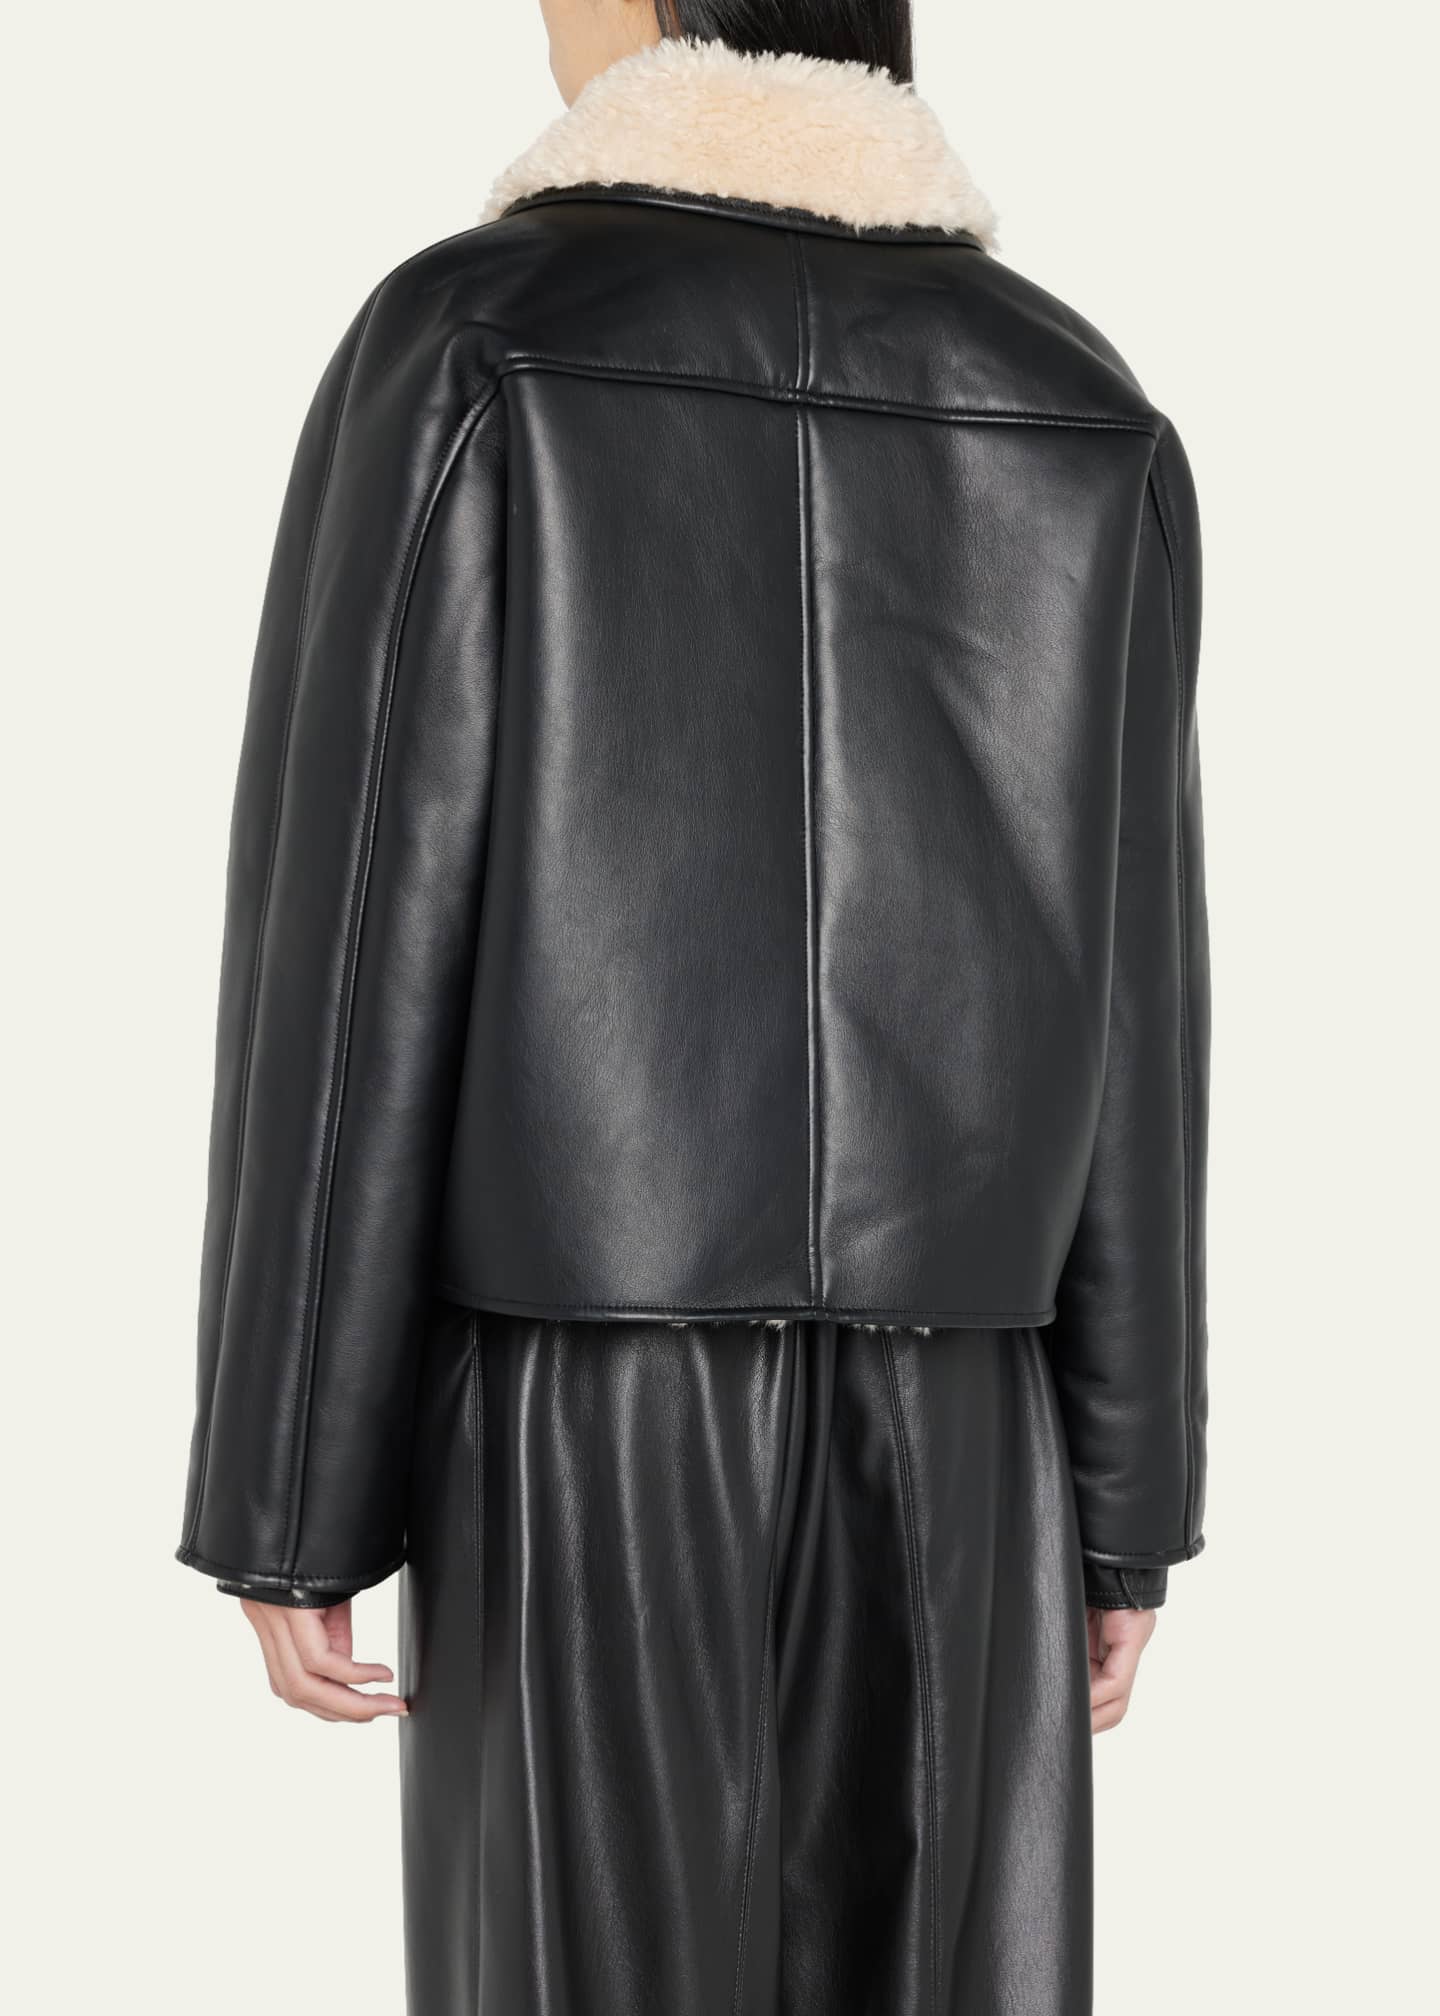 Stand Studio Amelie Faux Leather Jacket - Bergdorf Goodman